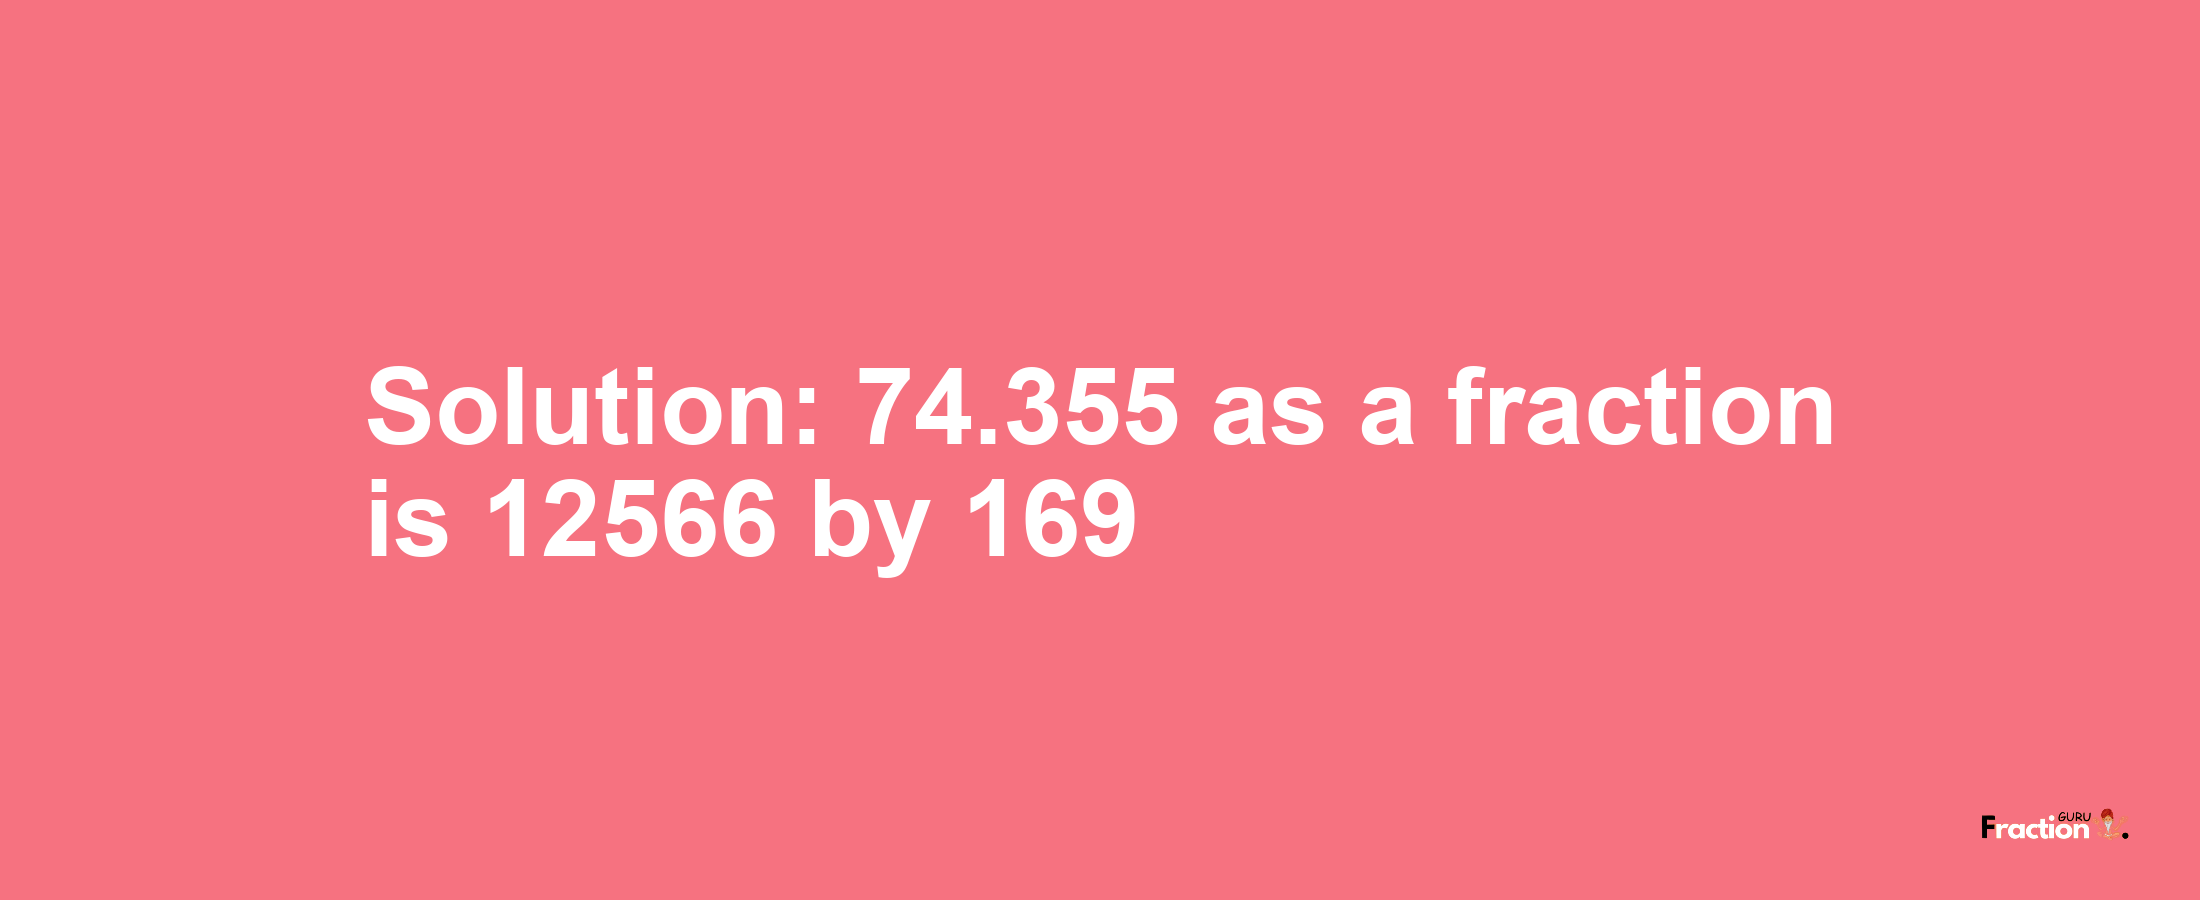 Solution:74.355 as a fraction is 12566/169